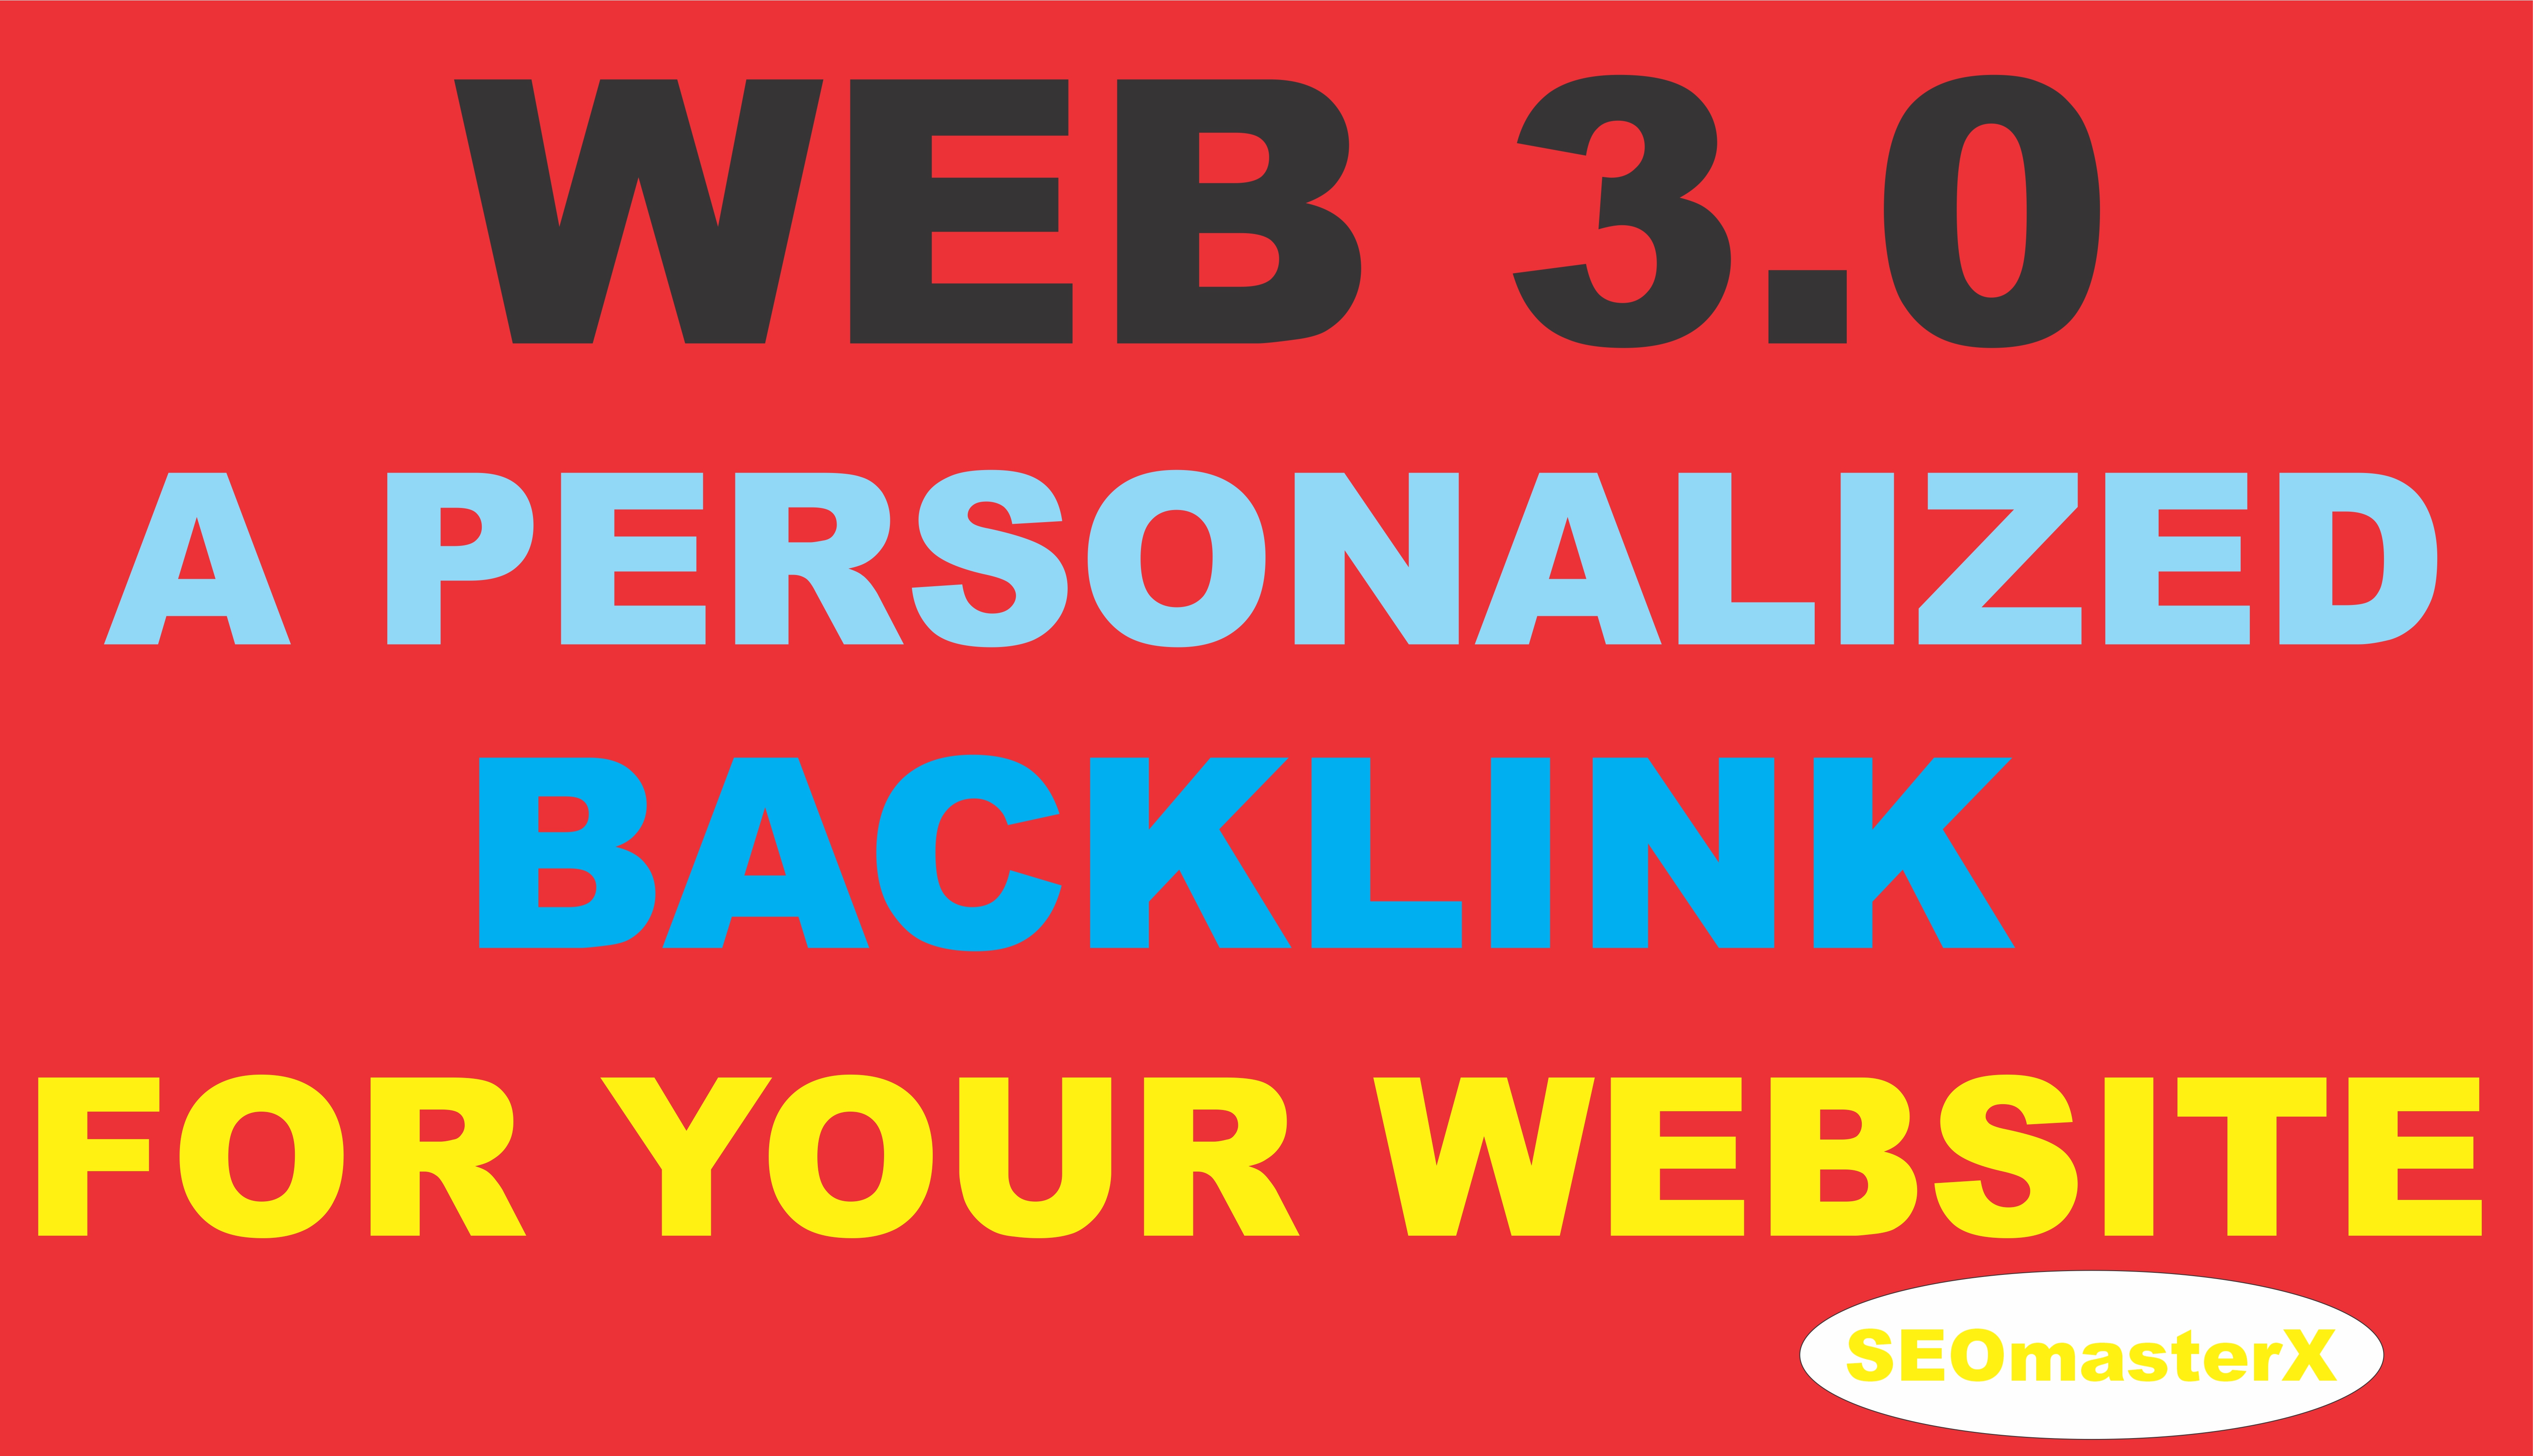 50 WEB 3.0 with 50 WEB 2.0 Backlinks - Latest SEO Technique for your website (Highly Recommended)